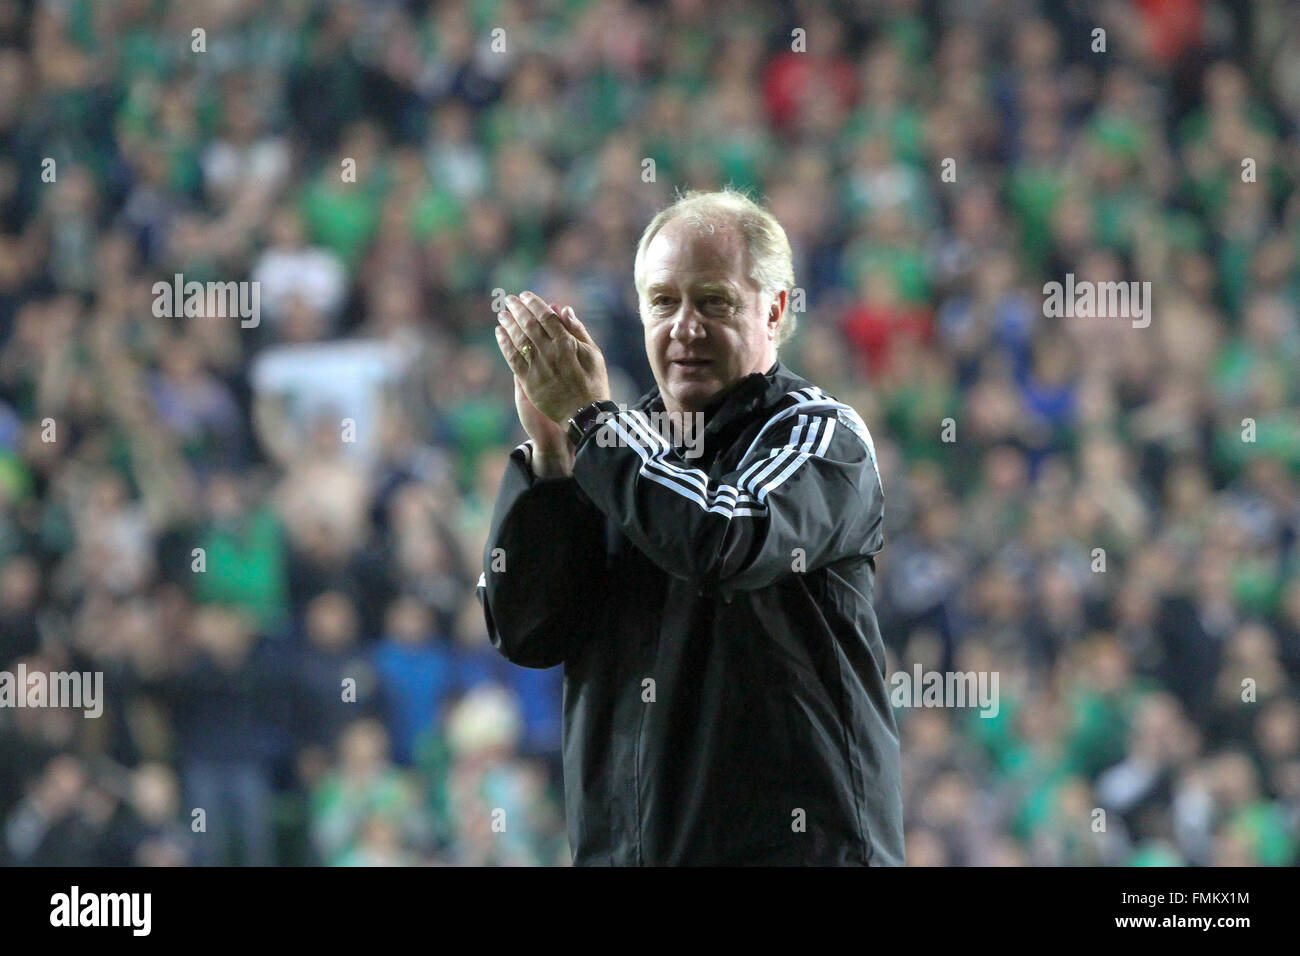 07 Sept 2015 - Euro 2016 Qualifier - Group F - Northern Ireland 1 Hungary 1. Northern Ireland assistant manager Jimmy Nicholl. Stock Photo